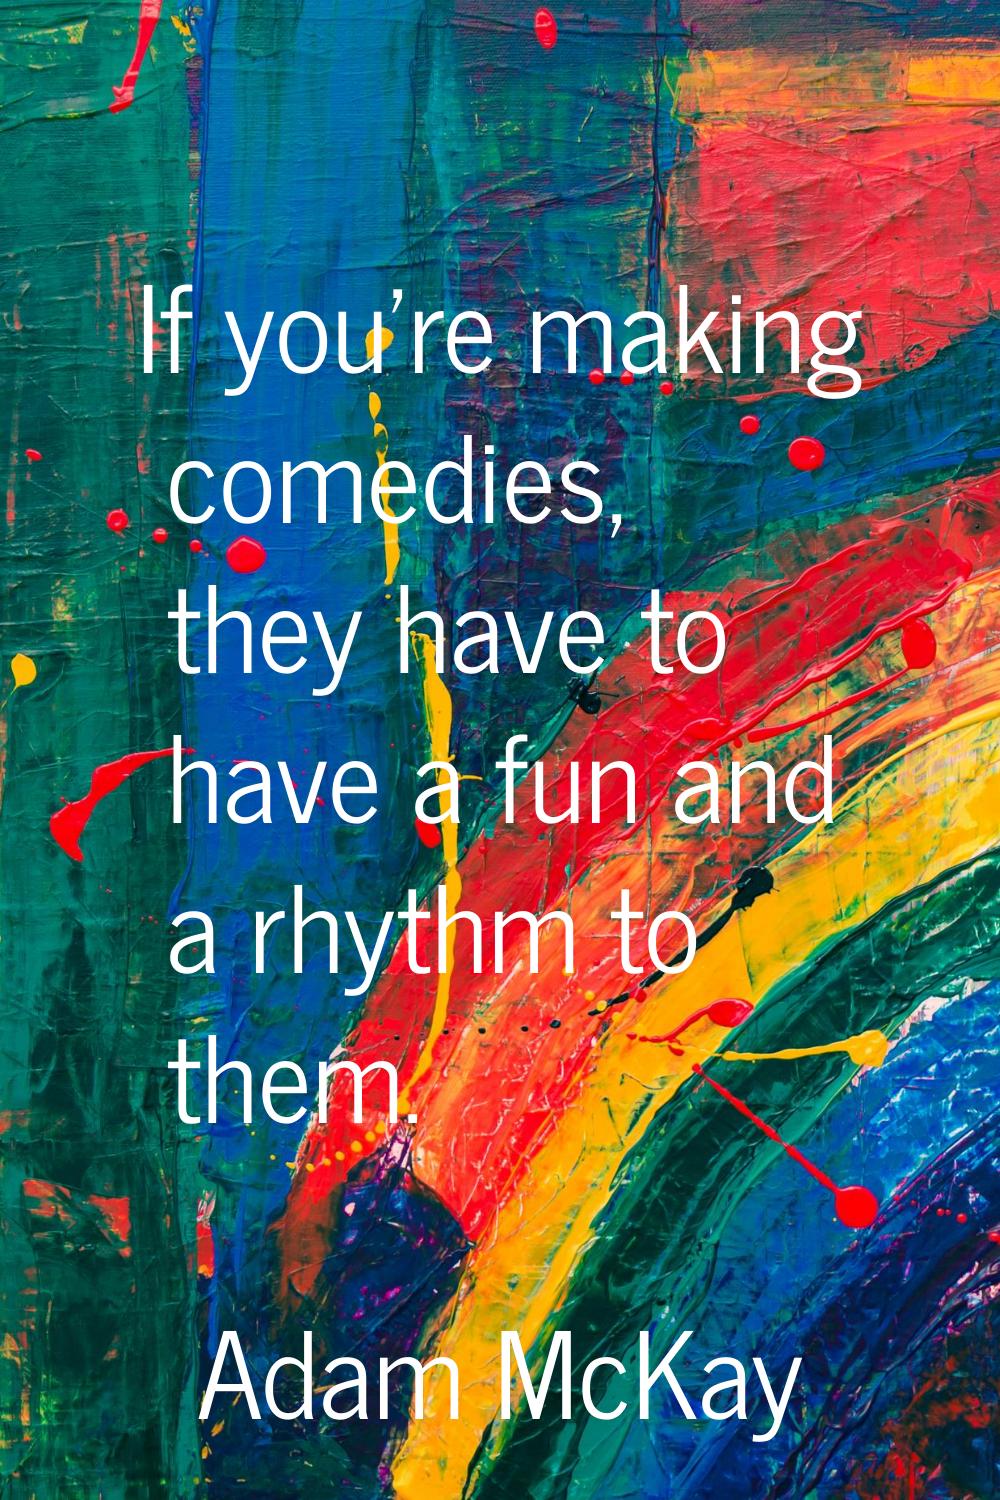 If you're making comedies, they have to have a fun and a rhythm to them.